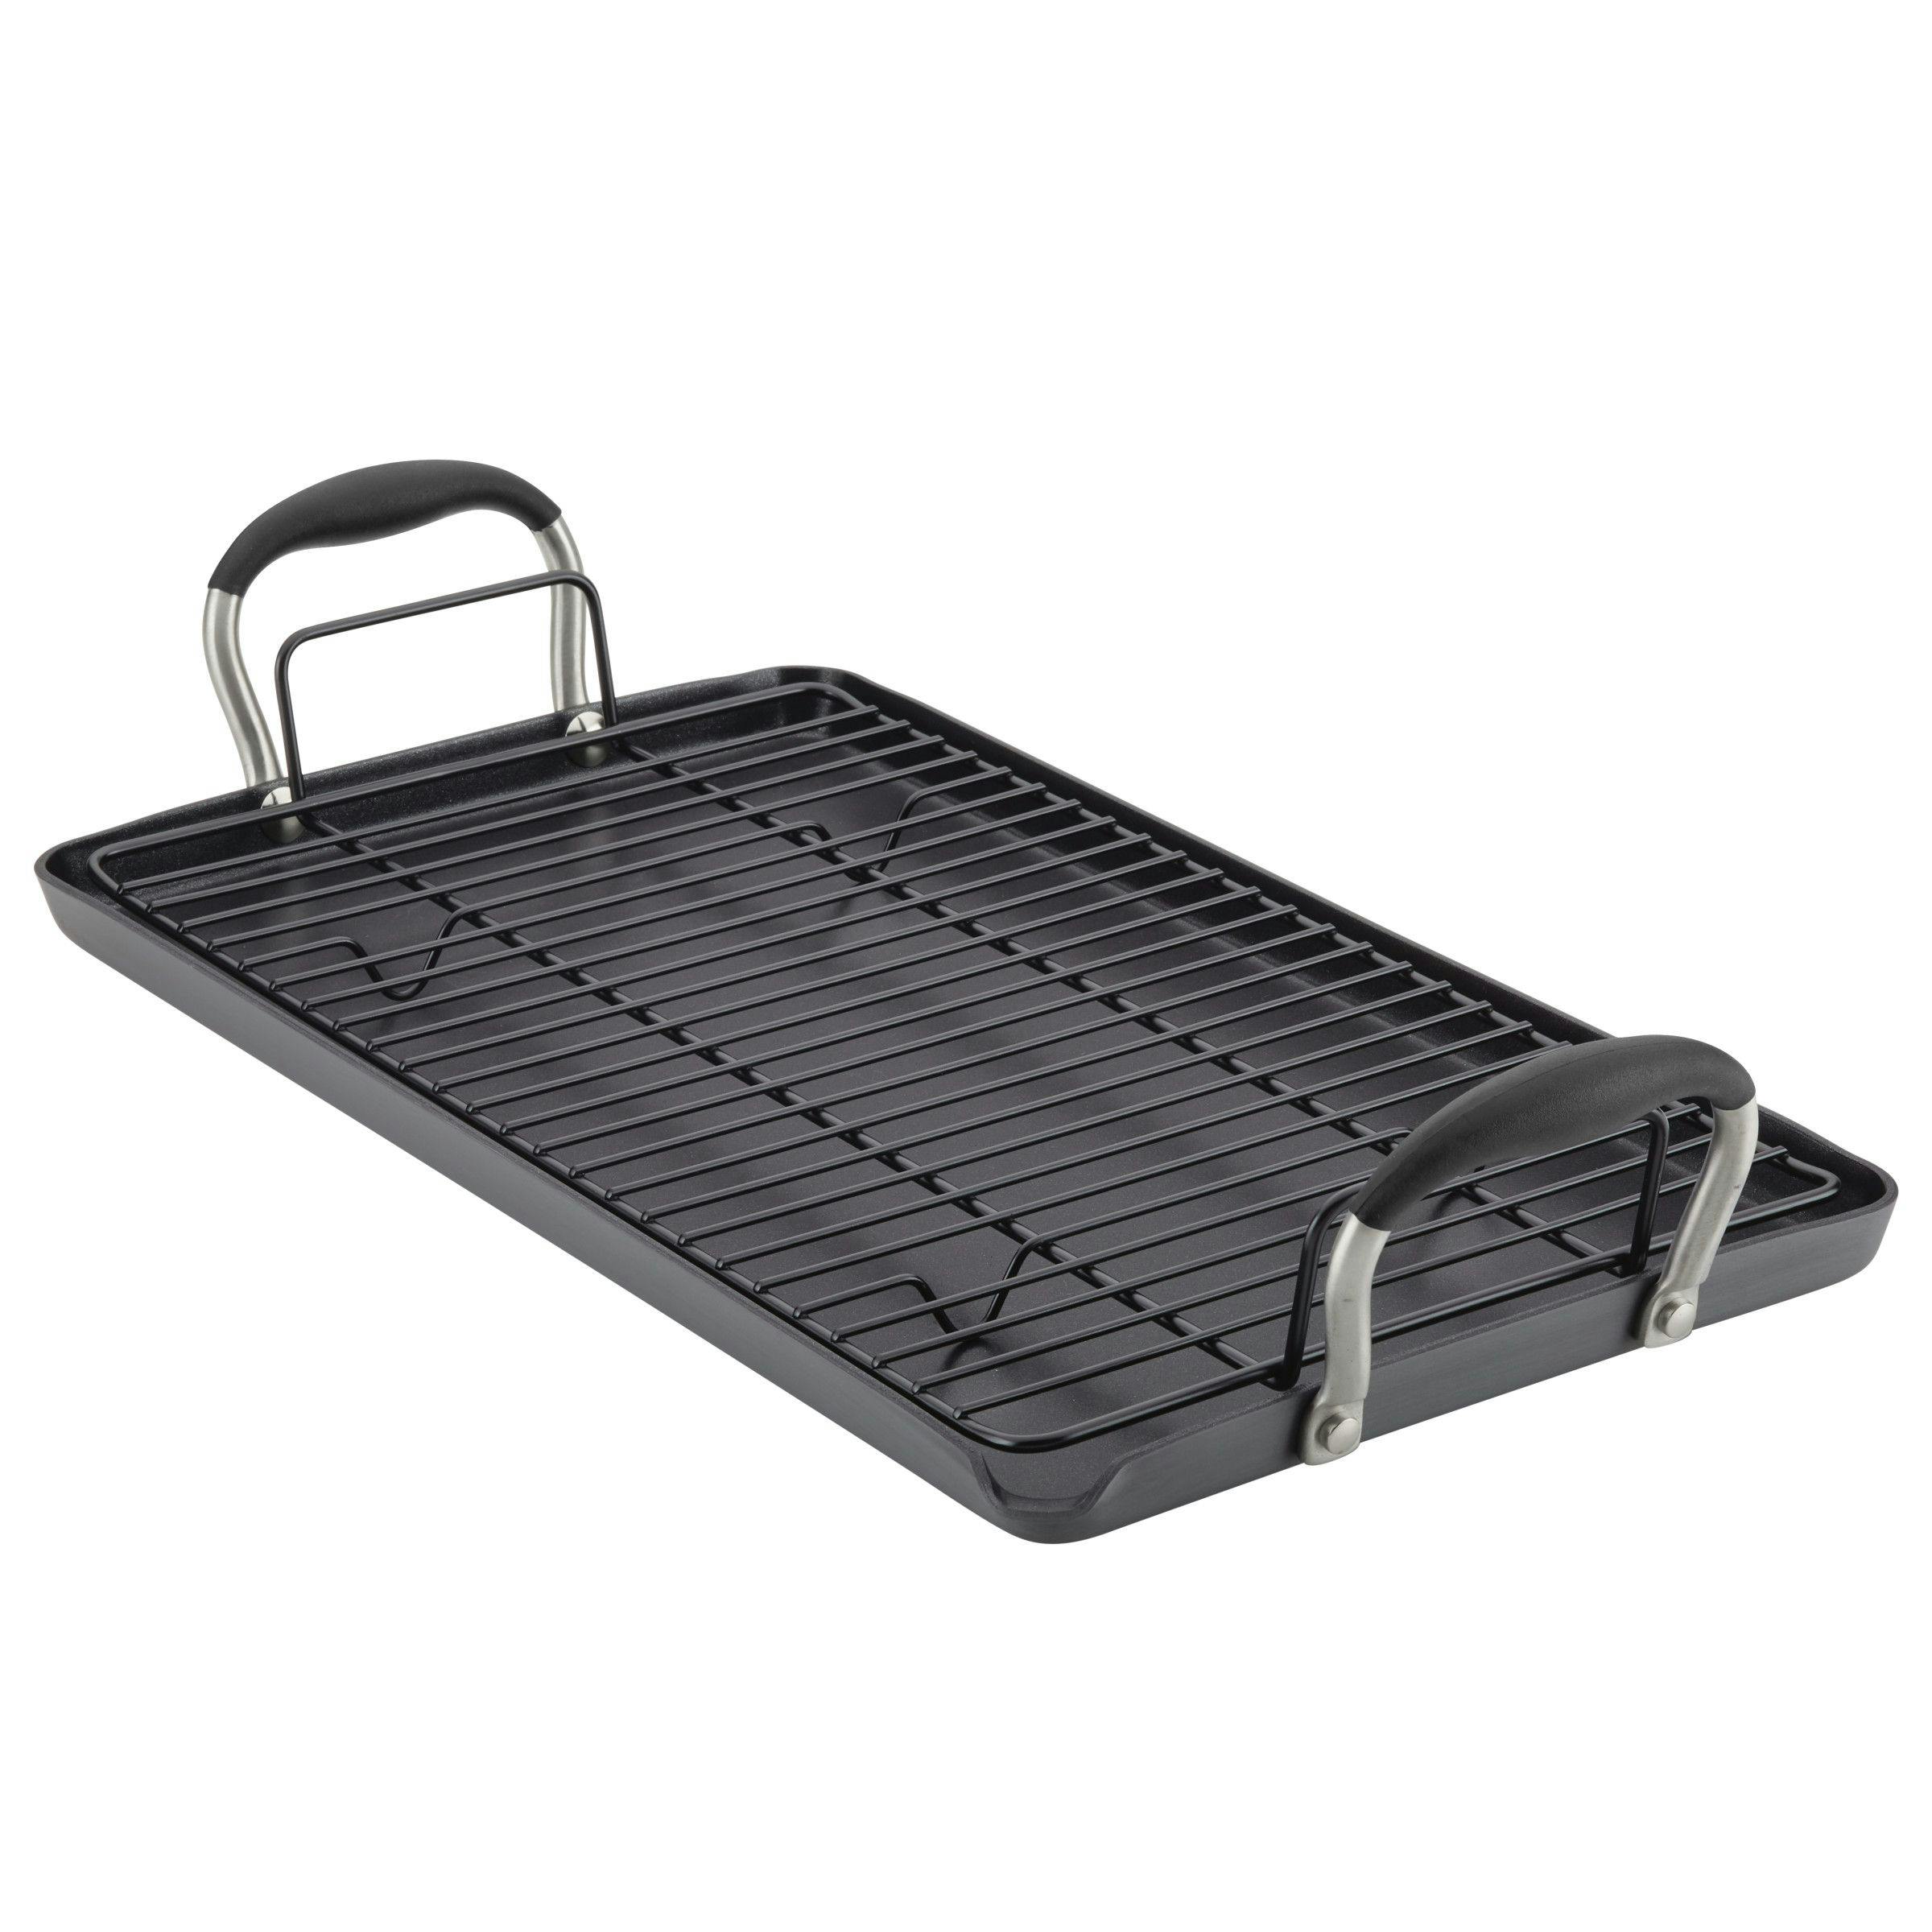 Anolon Advanced Home Hard-Anodized Nonstick Double Burner Griddle, 10-Inch x 18-Inch